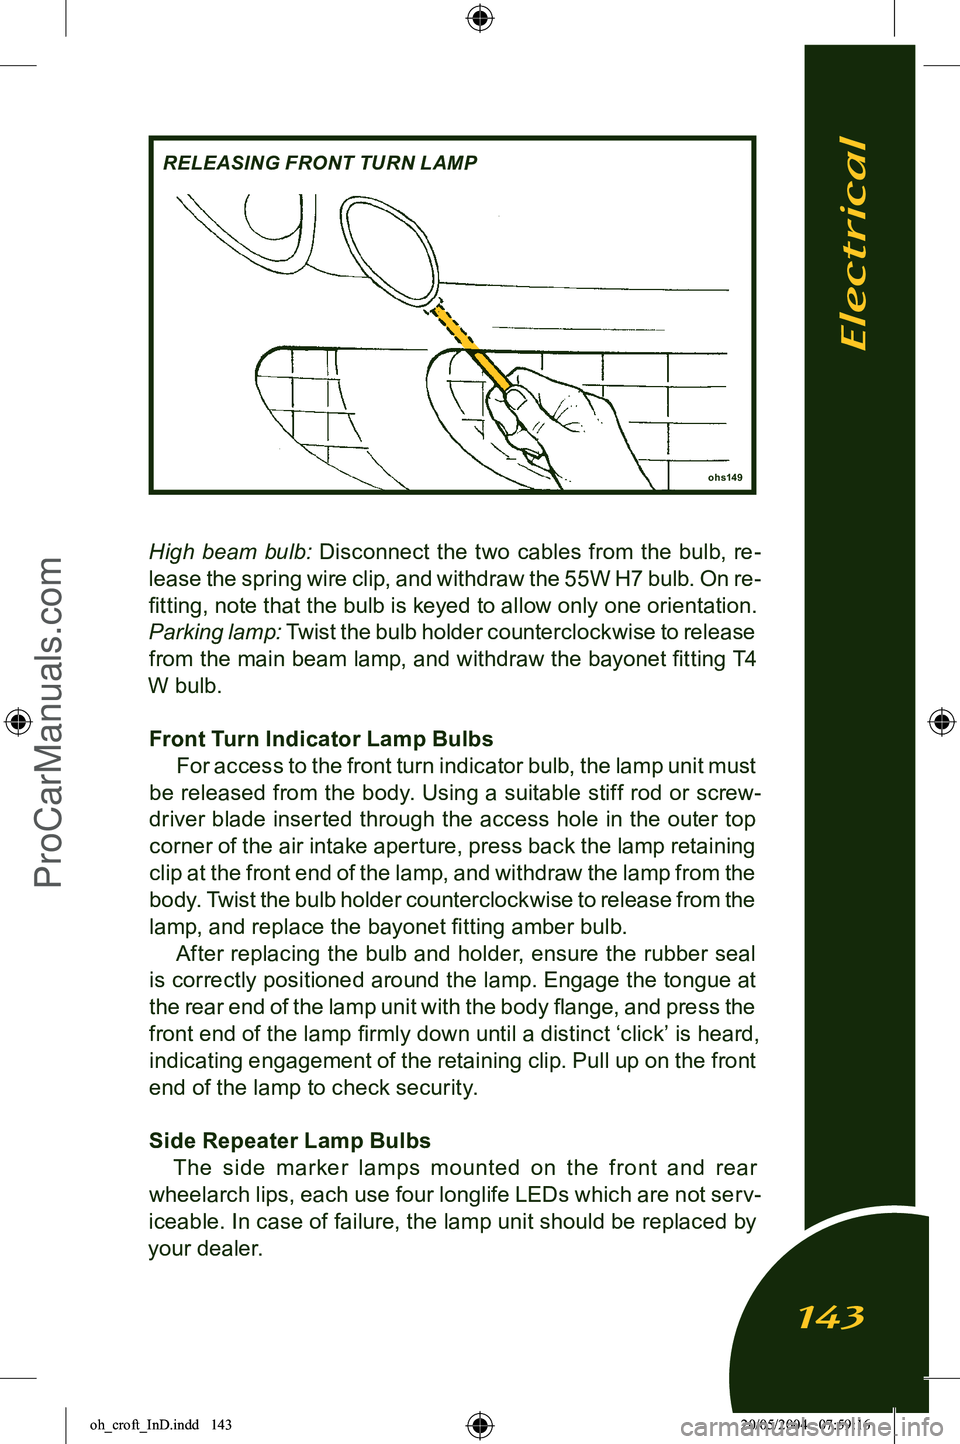 LOTUS ELISE 2005  Owners Manual 
High  beam  bulb:  Disconnect  the  two  cables  from  the  bulb,  re-
lease the spring wire clip, and withdraw the 55W H7 bulb. On re
-
ﬁtting, note that the bulb is keyed to allow only one orient